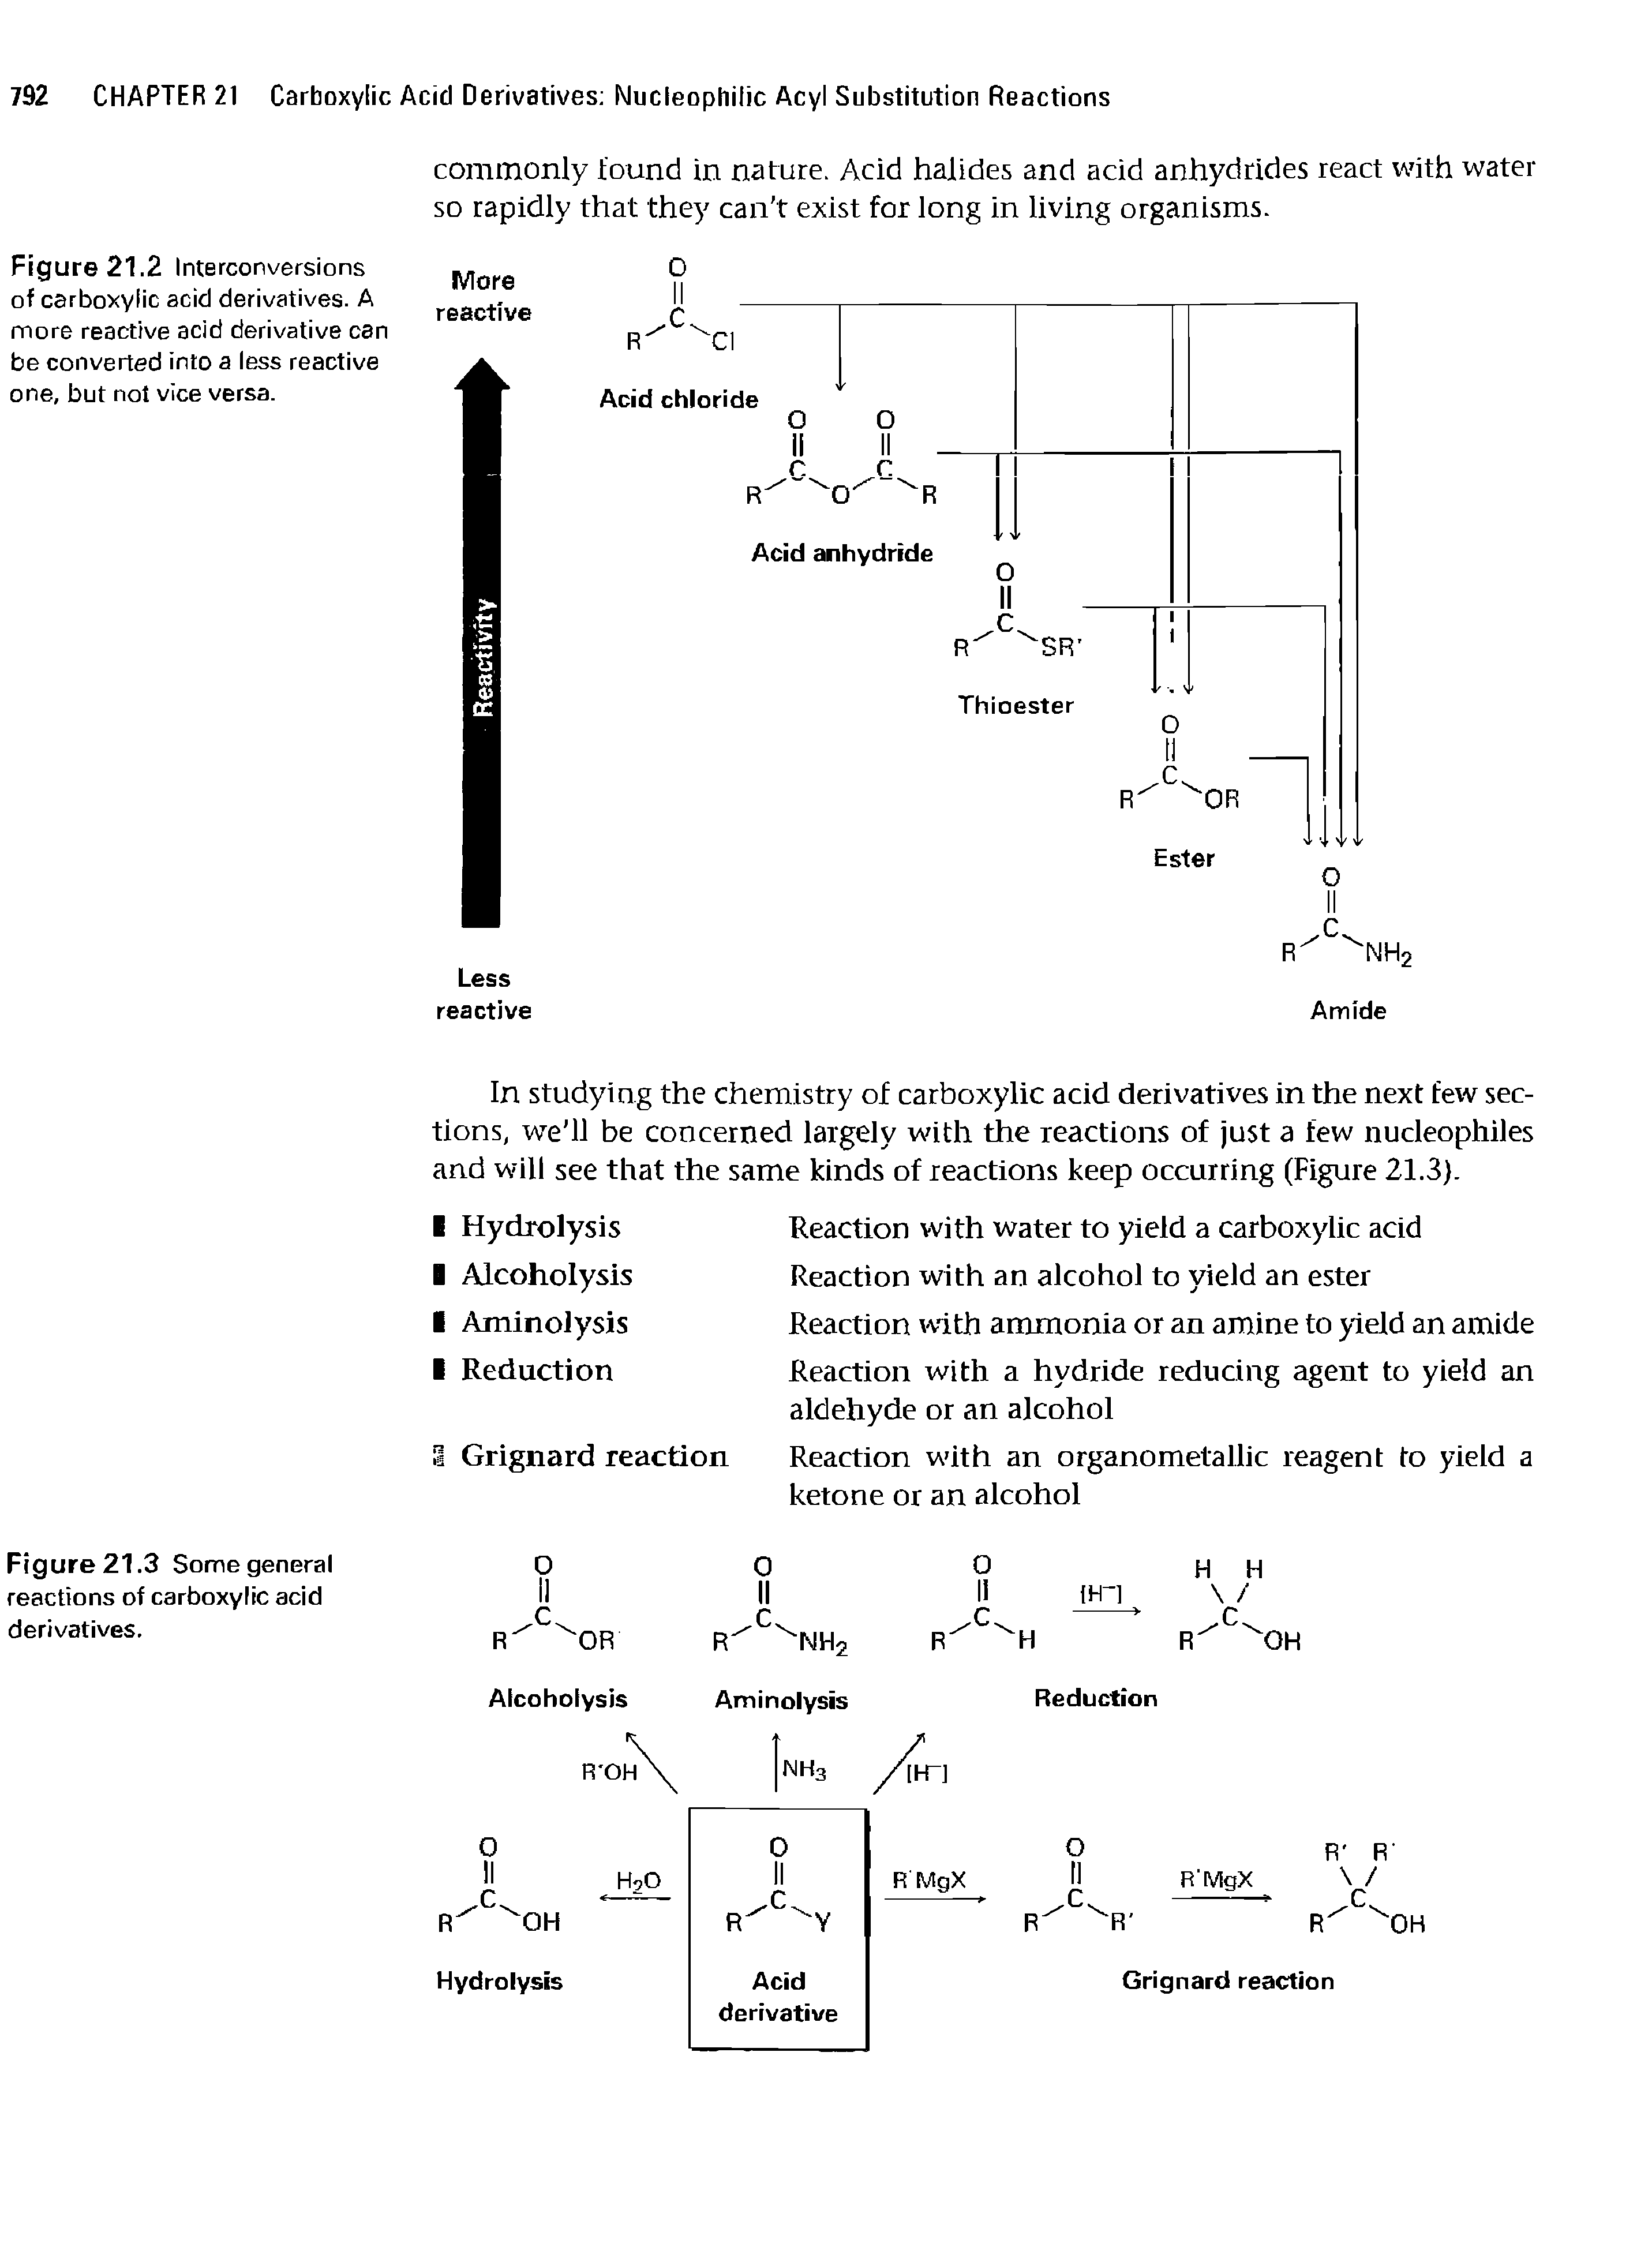 Figure 21.2 Interconversions of carboxylic acid derivatives. A more reactive acid derivative can be converted into a less reactive one, but not vice versa.